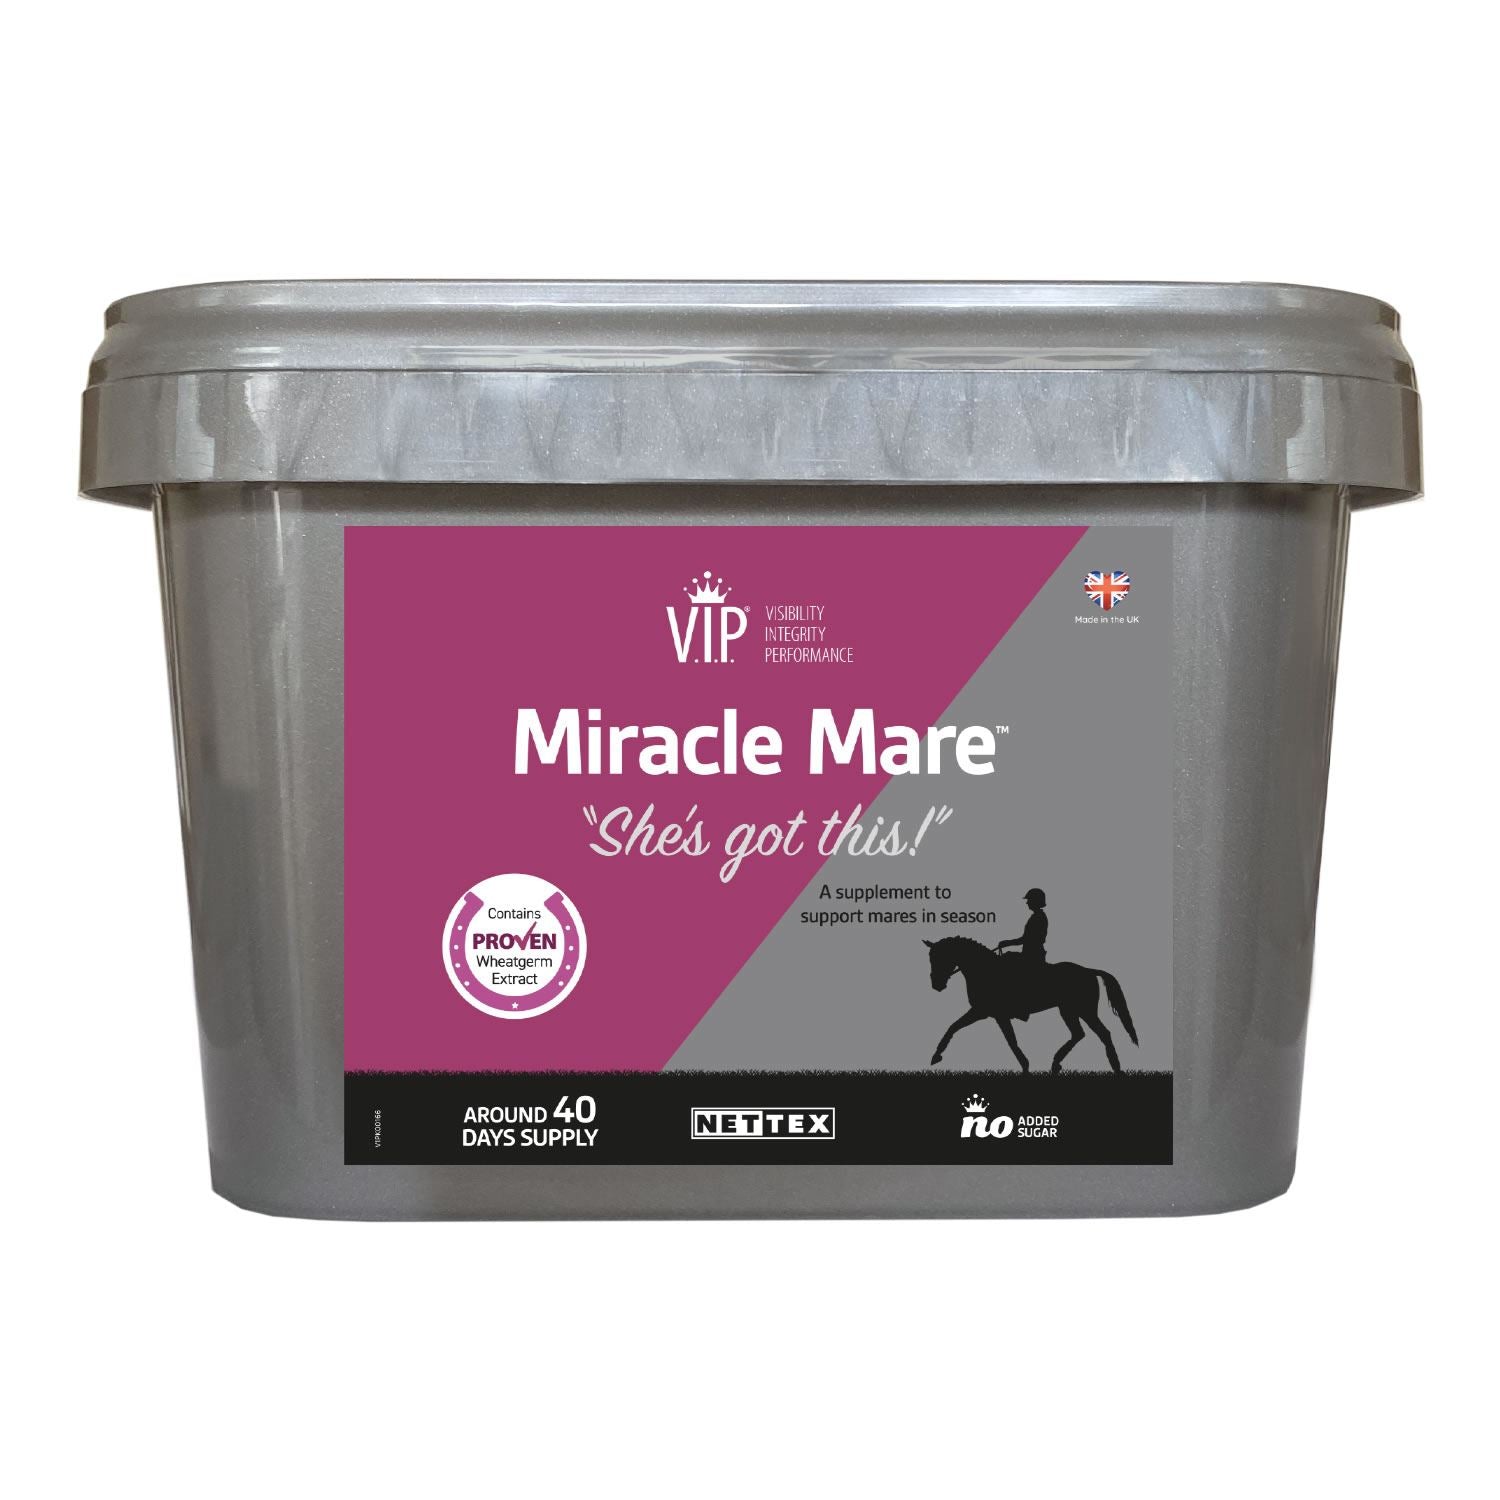 Nettex Vip Miracle Mare - Just Horse Riders